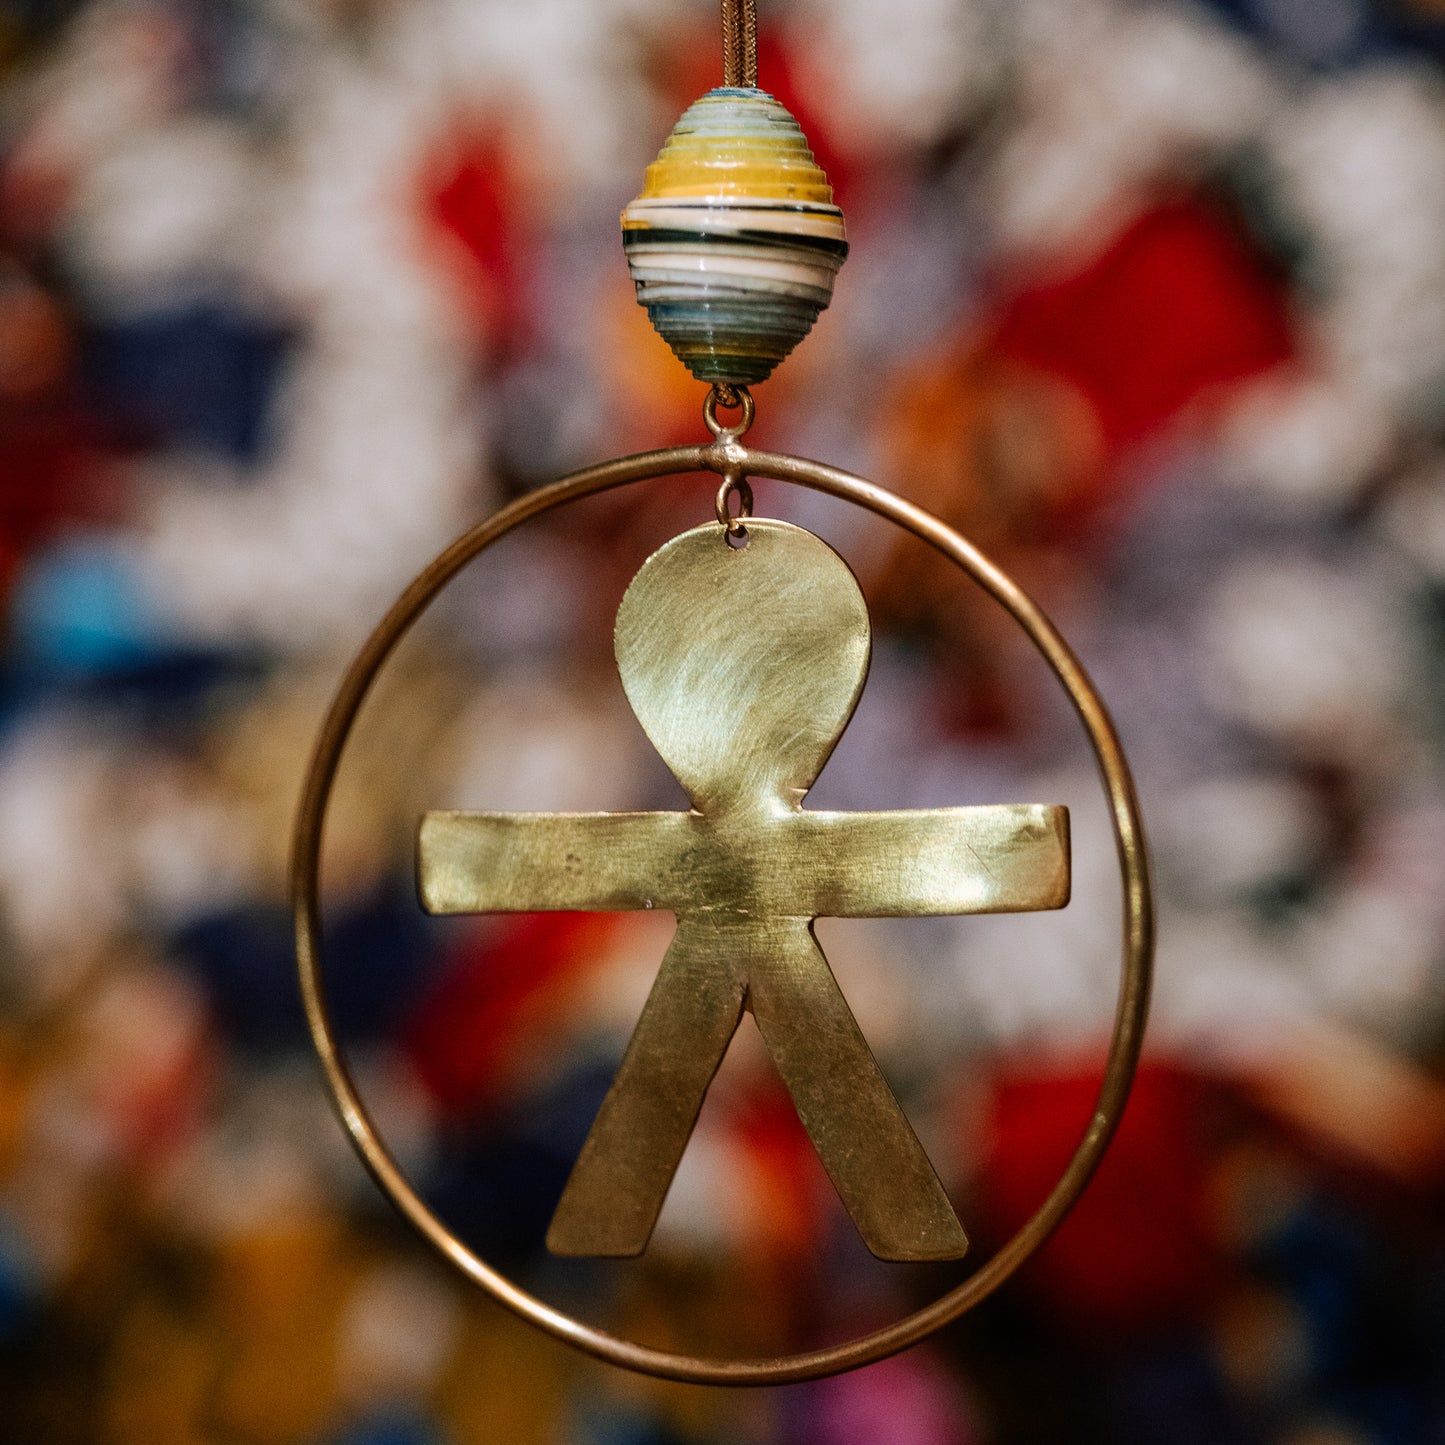 Encircled Brass Ornament - Proceeds Help Support Our School in Kenya